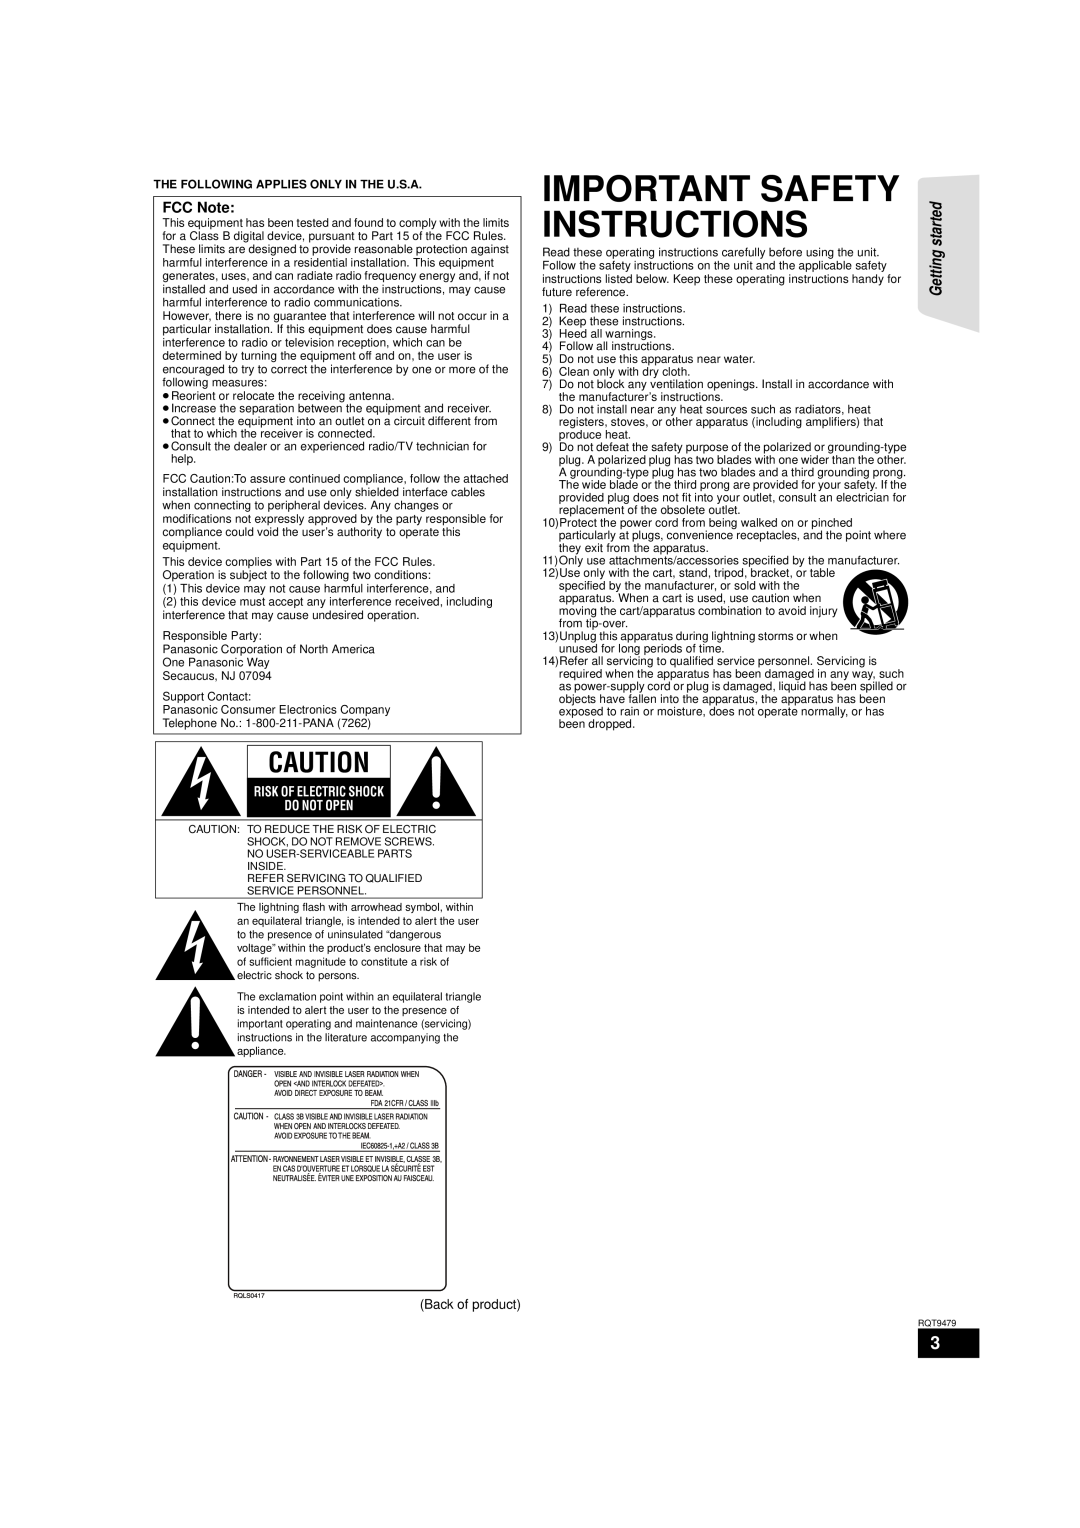 Panasonic SC-BTX70, SA-BTX70 Important Safety Instructions, FCC Note, Risk Of Electric Shock Do Not Open, Getting started 